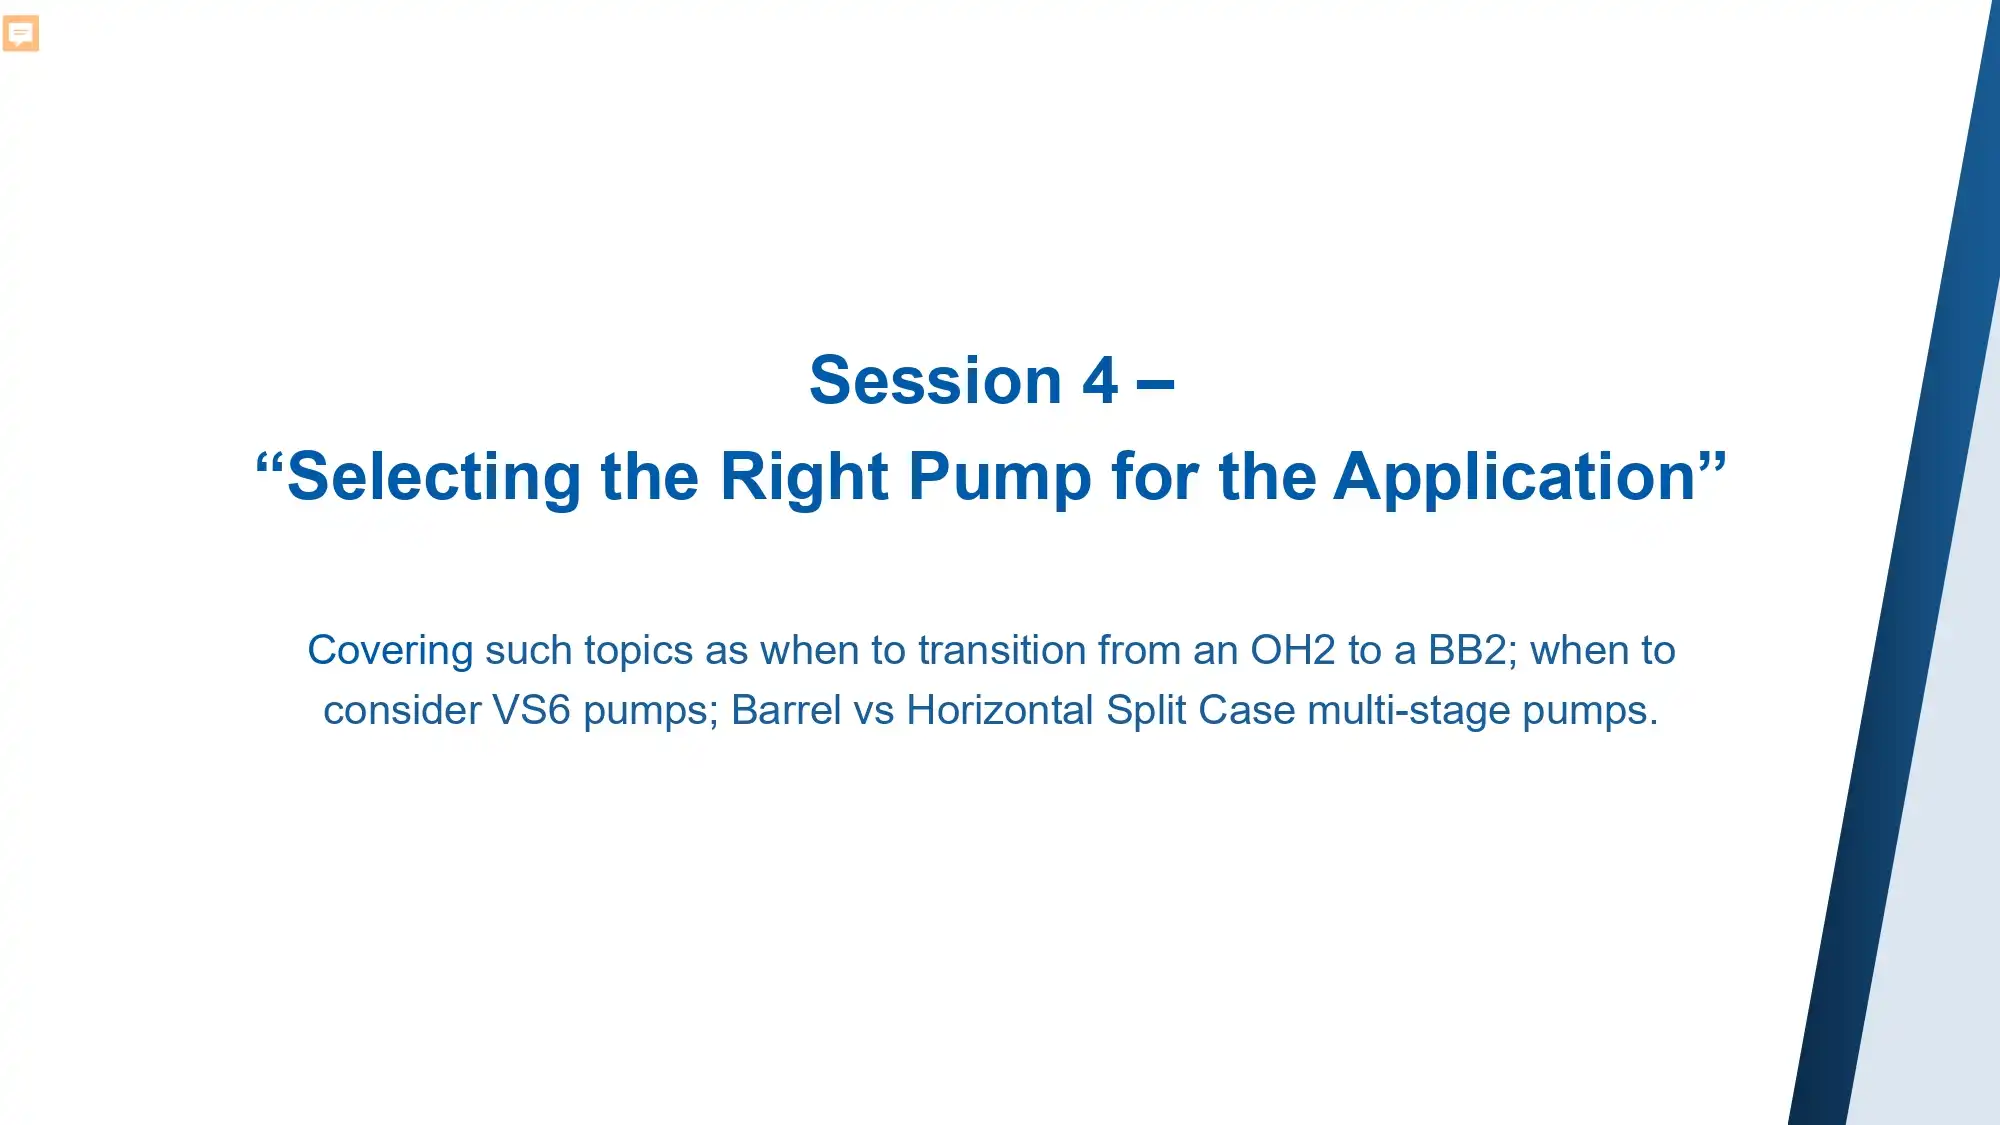 Session 4 Selecting the Right Pump for the Application